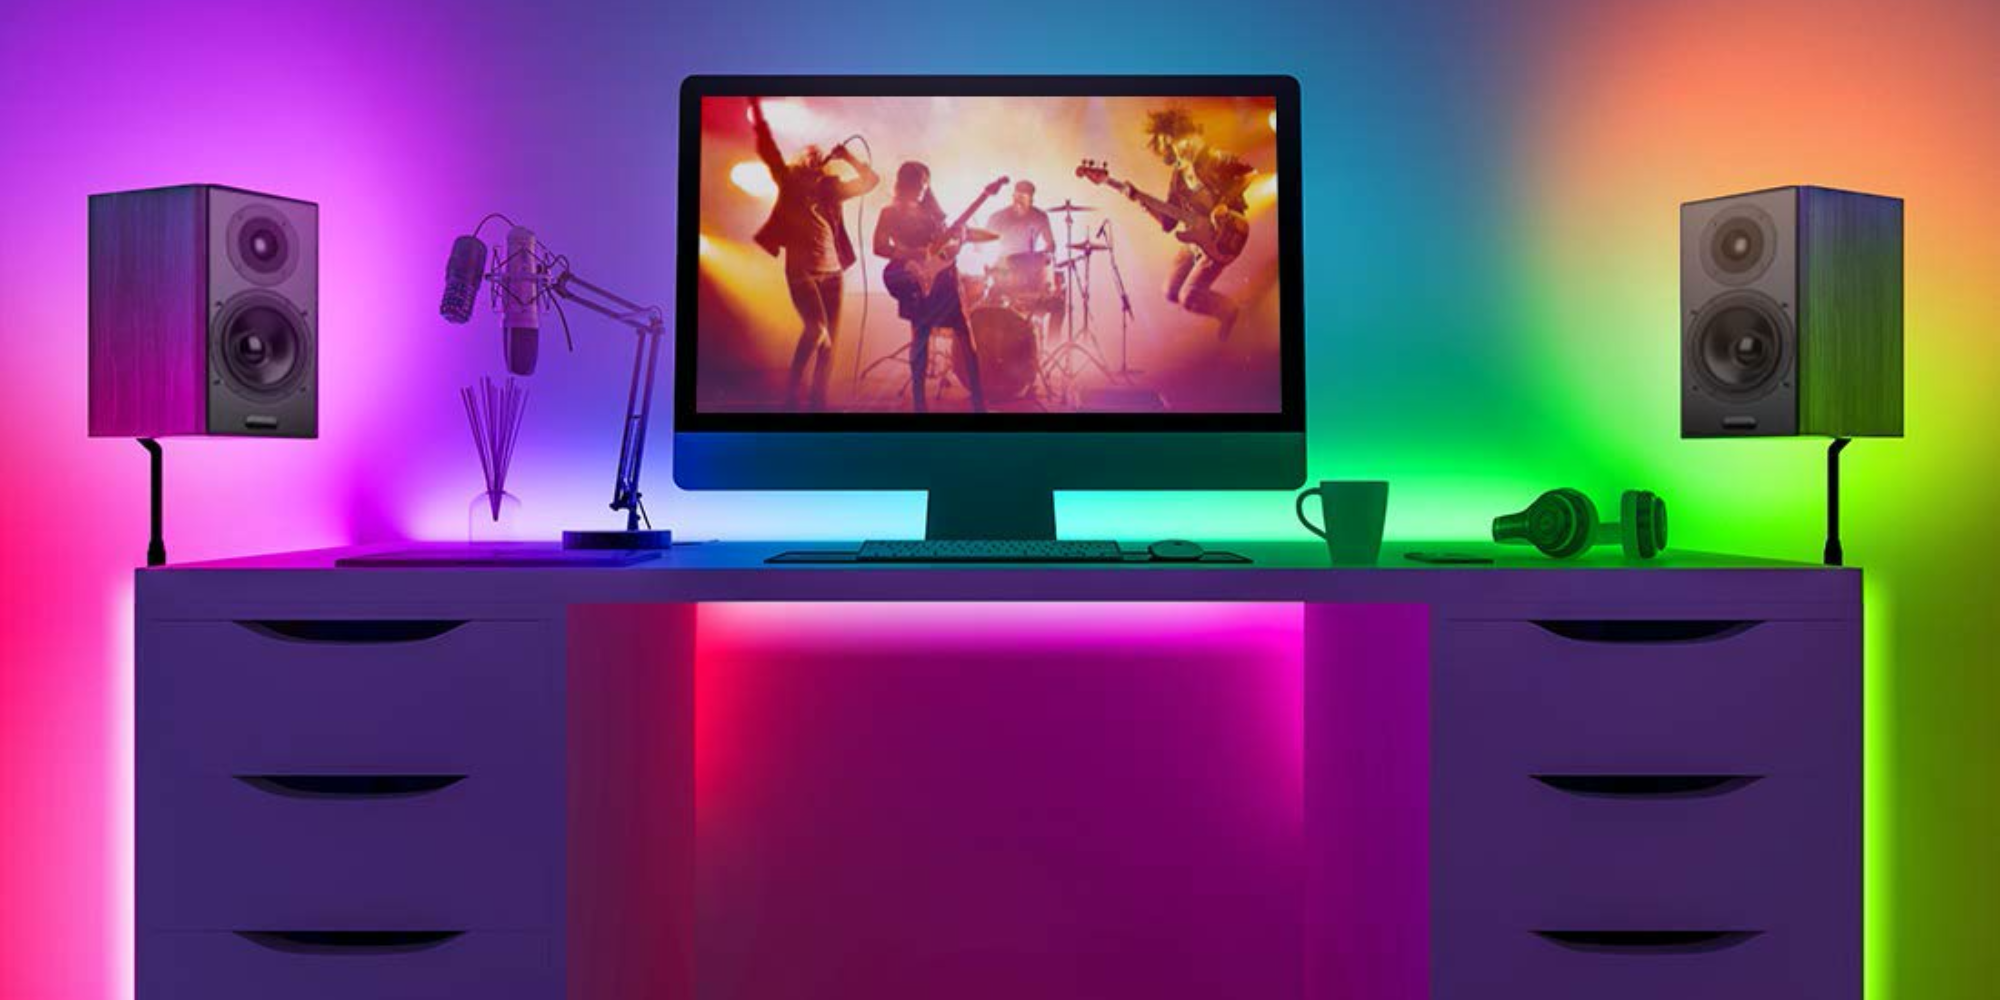 https://9to5toys.com/wp-content/uploads/sites/5/2019/10/govee-dreamcolor-rgb-led-strip.png